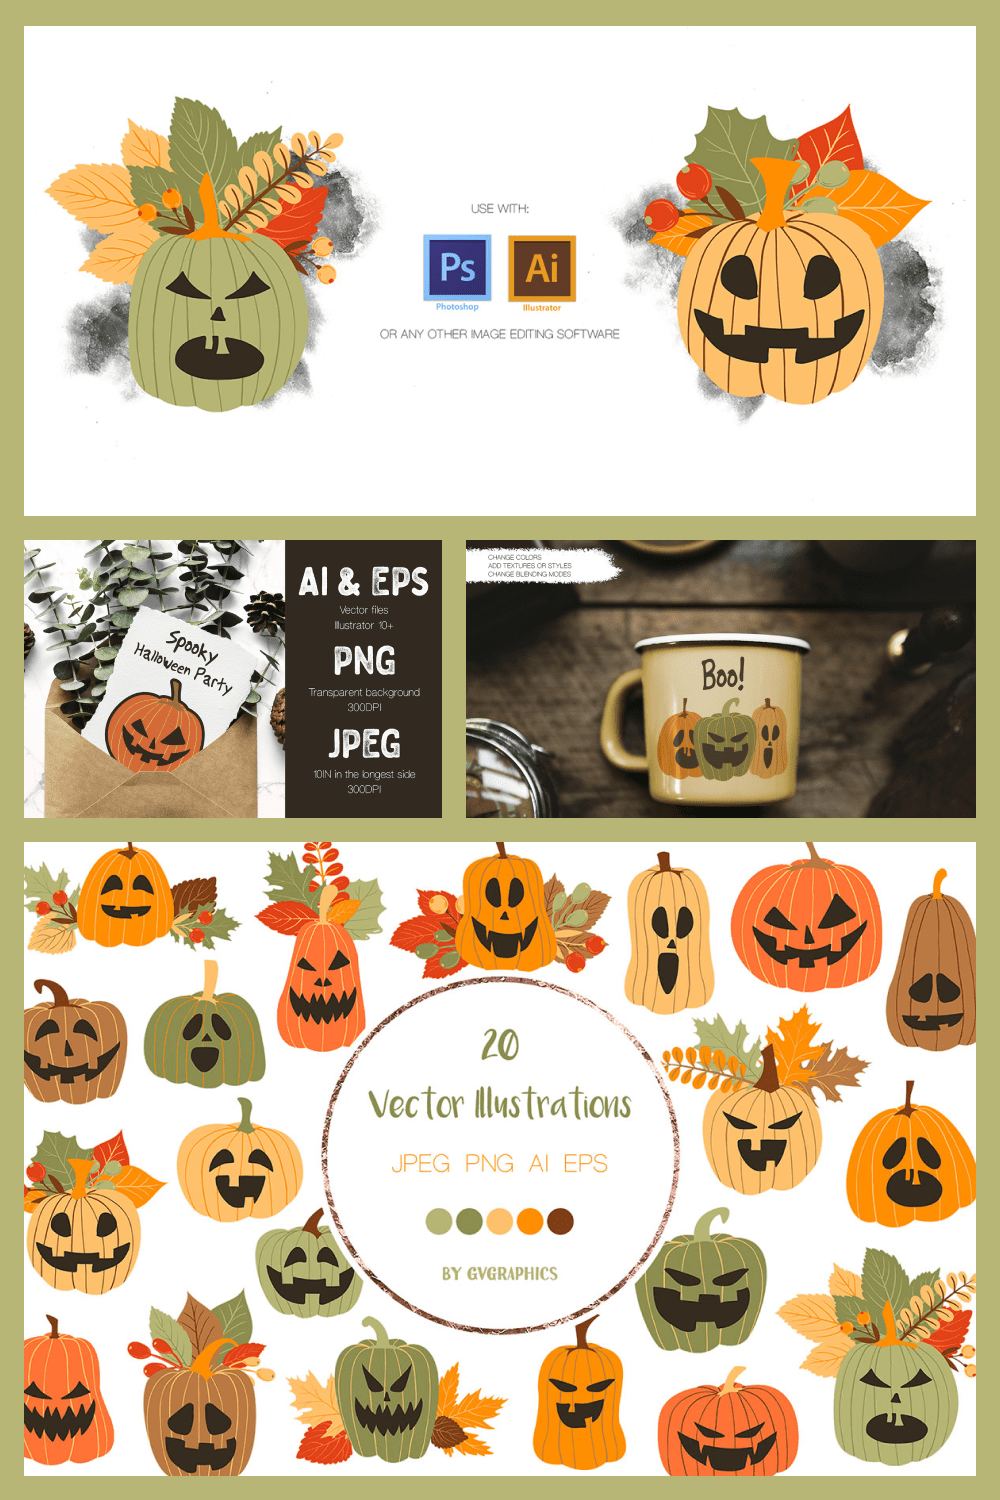 Choose the pumpkin you need in style and make your kids happy on Halloween.